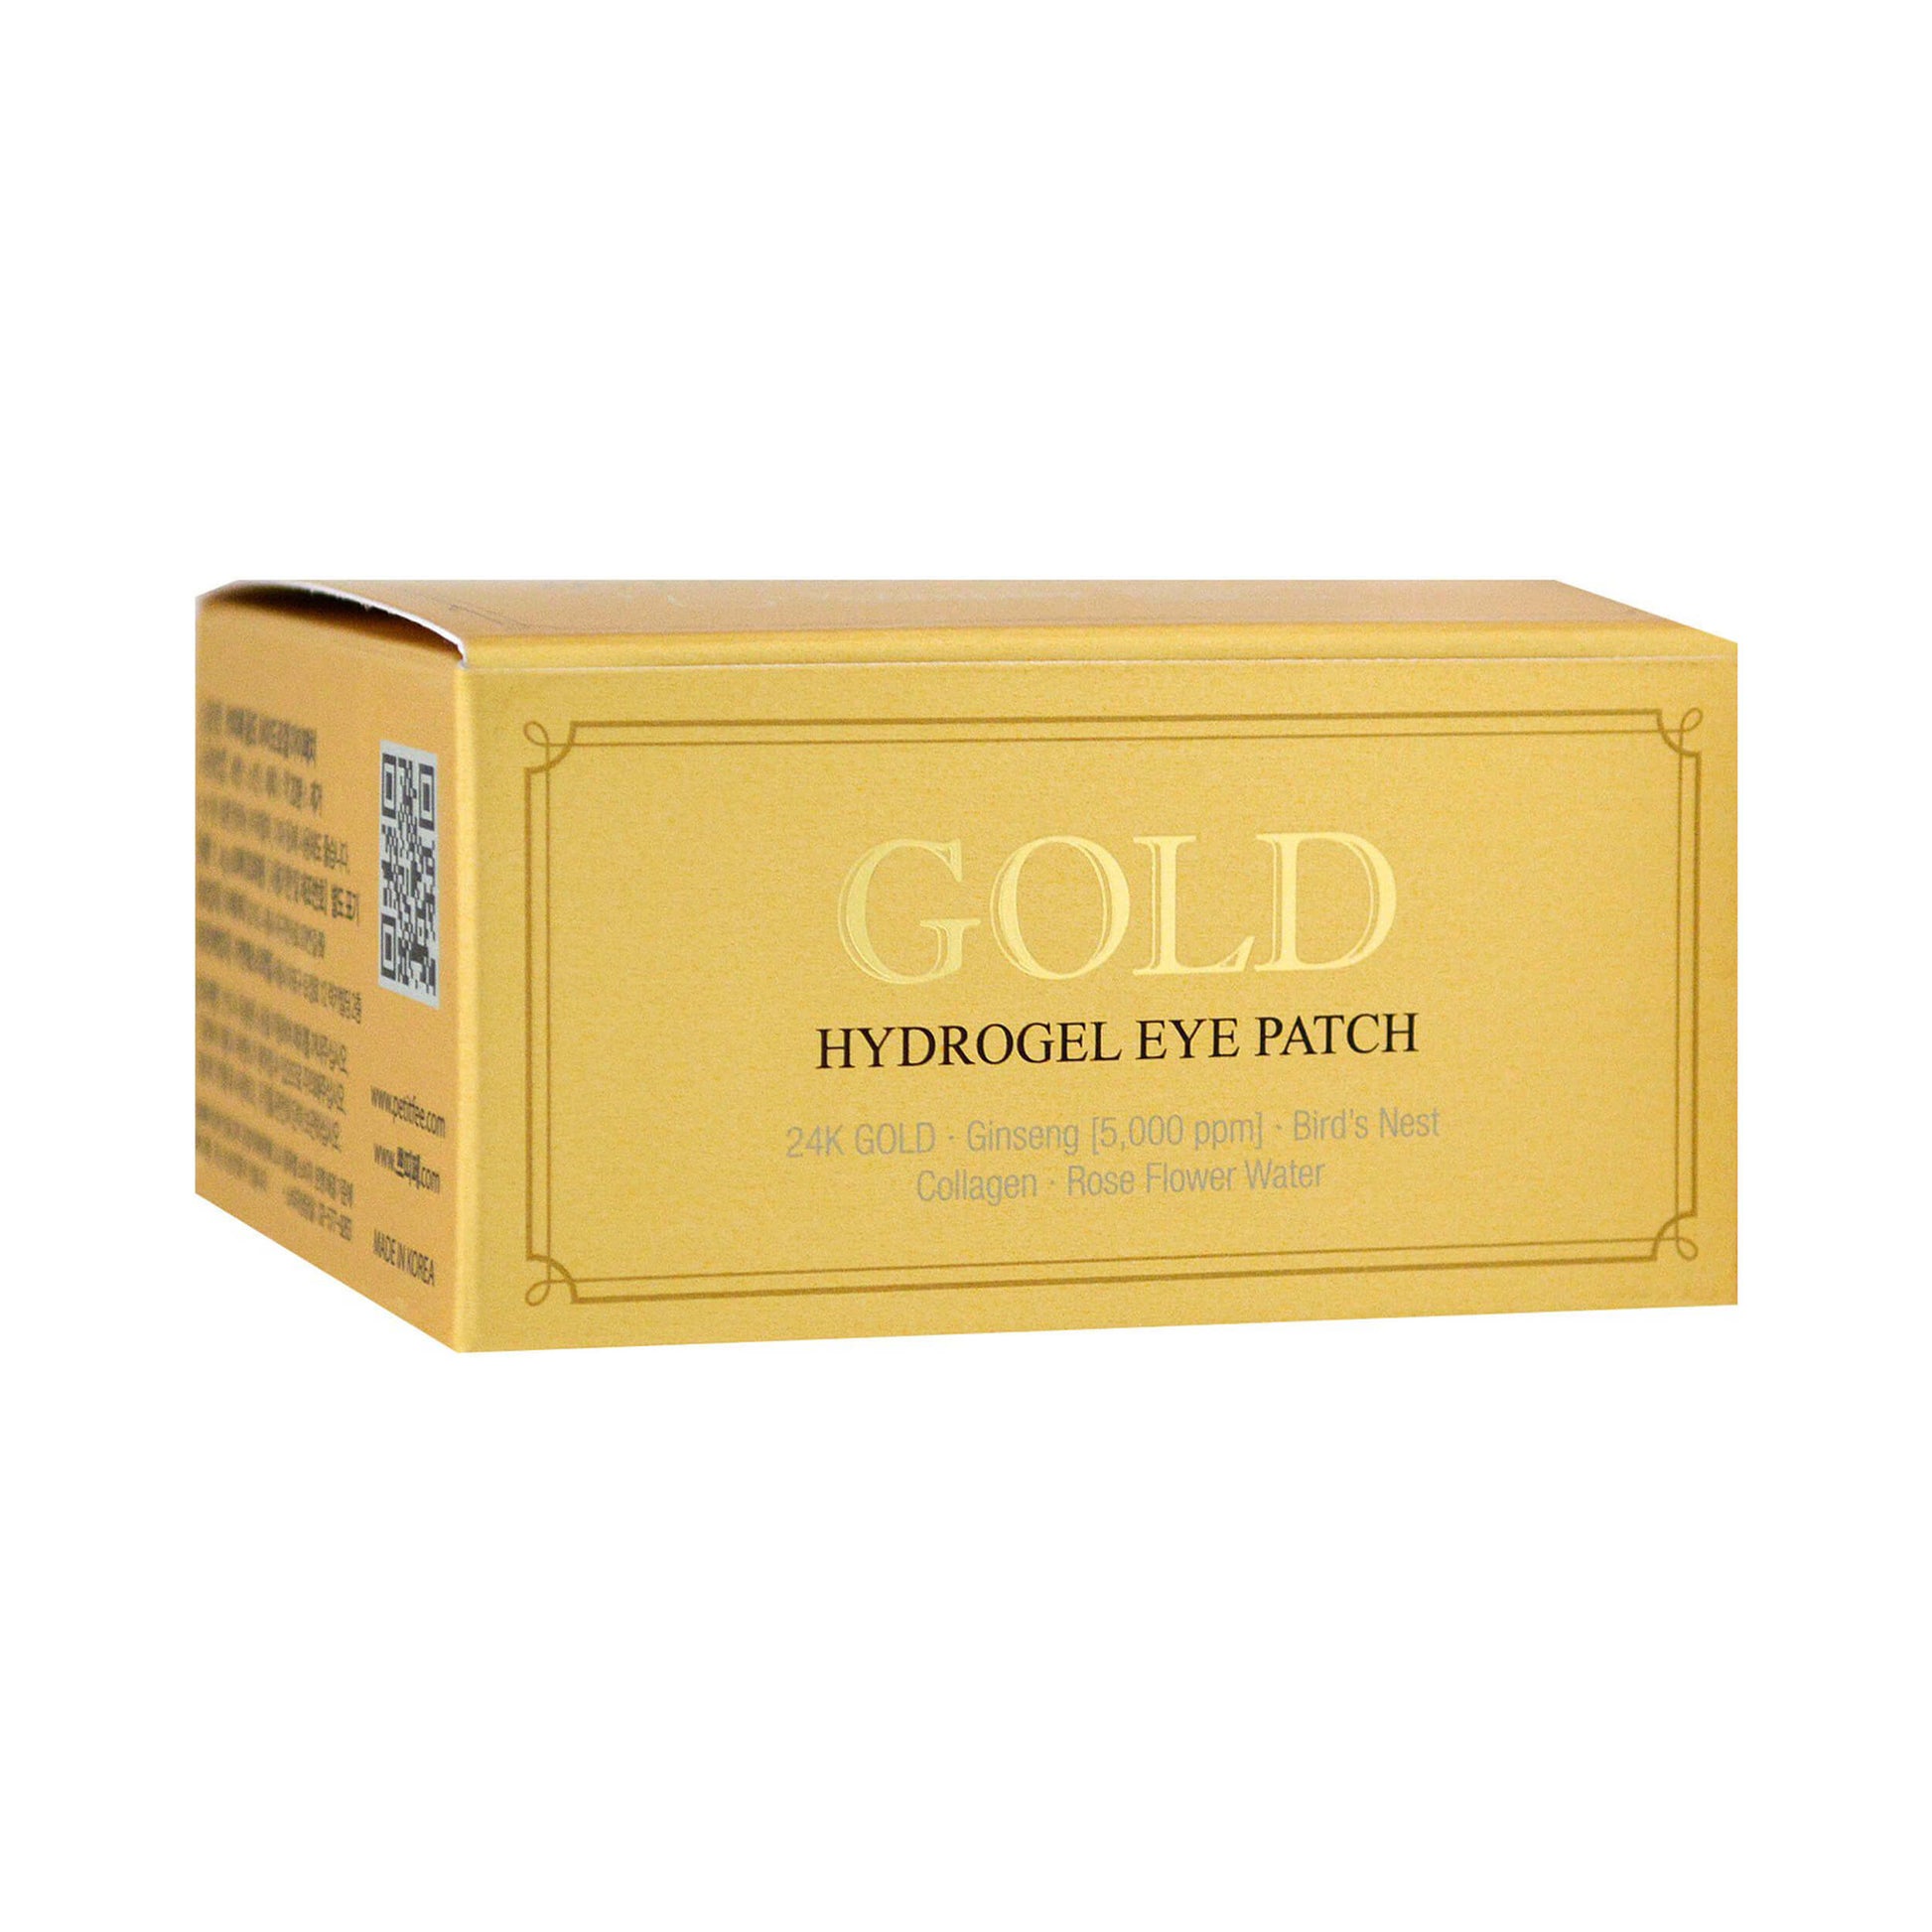 Petitfee Gold Hydrogel Eye Patch 60 Patches